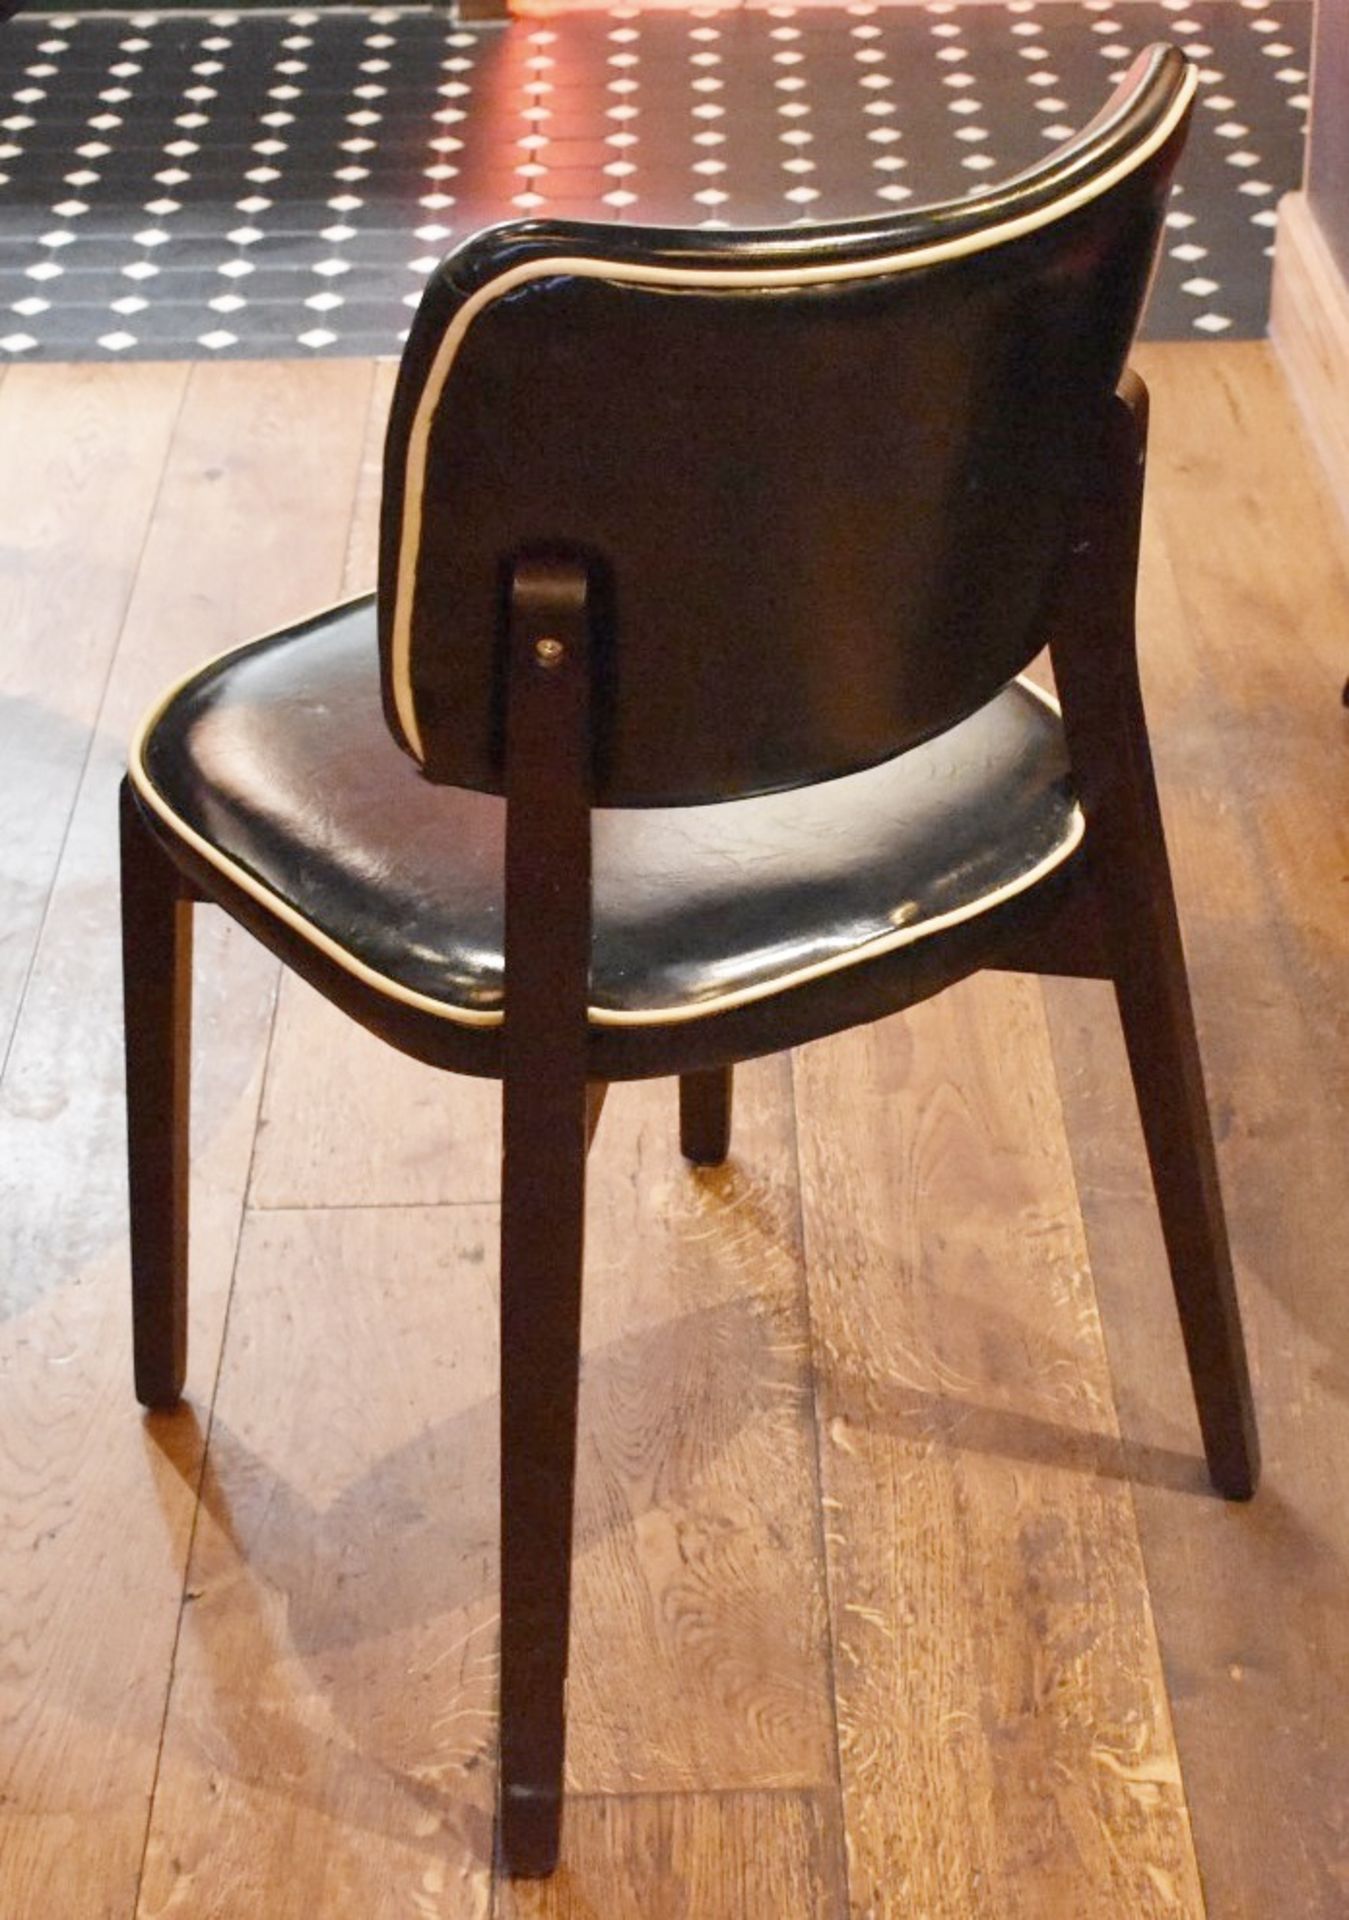 5 x Black Faux Leather Dining Chairs From Italian American Restaurant - Retro Design With Dark - Image 3 of 3